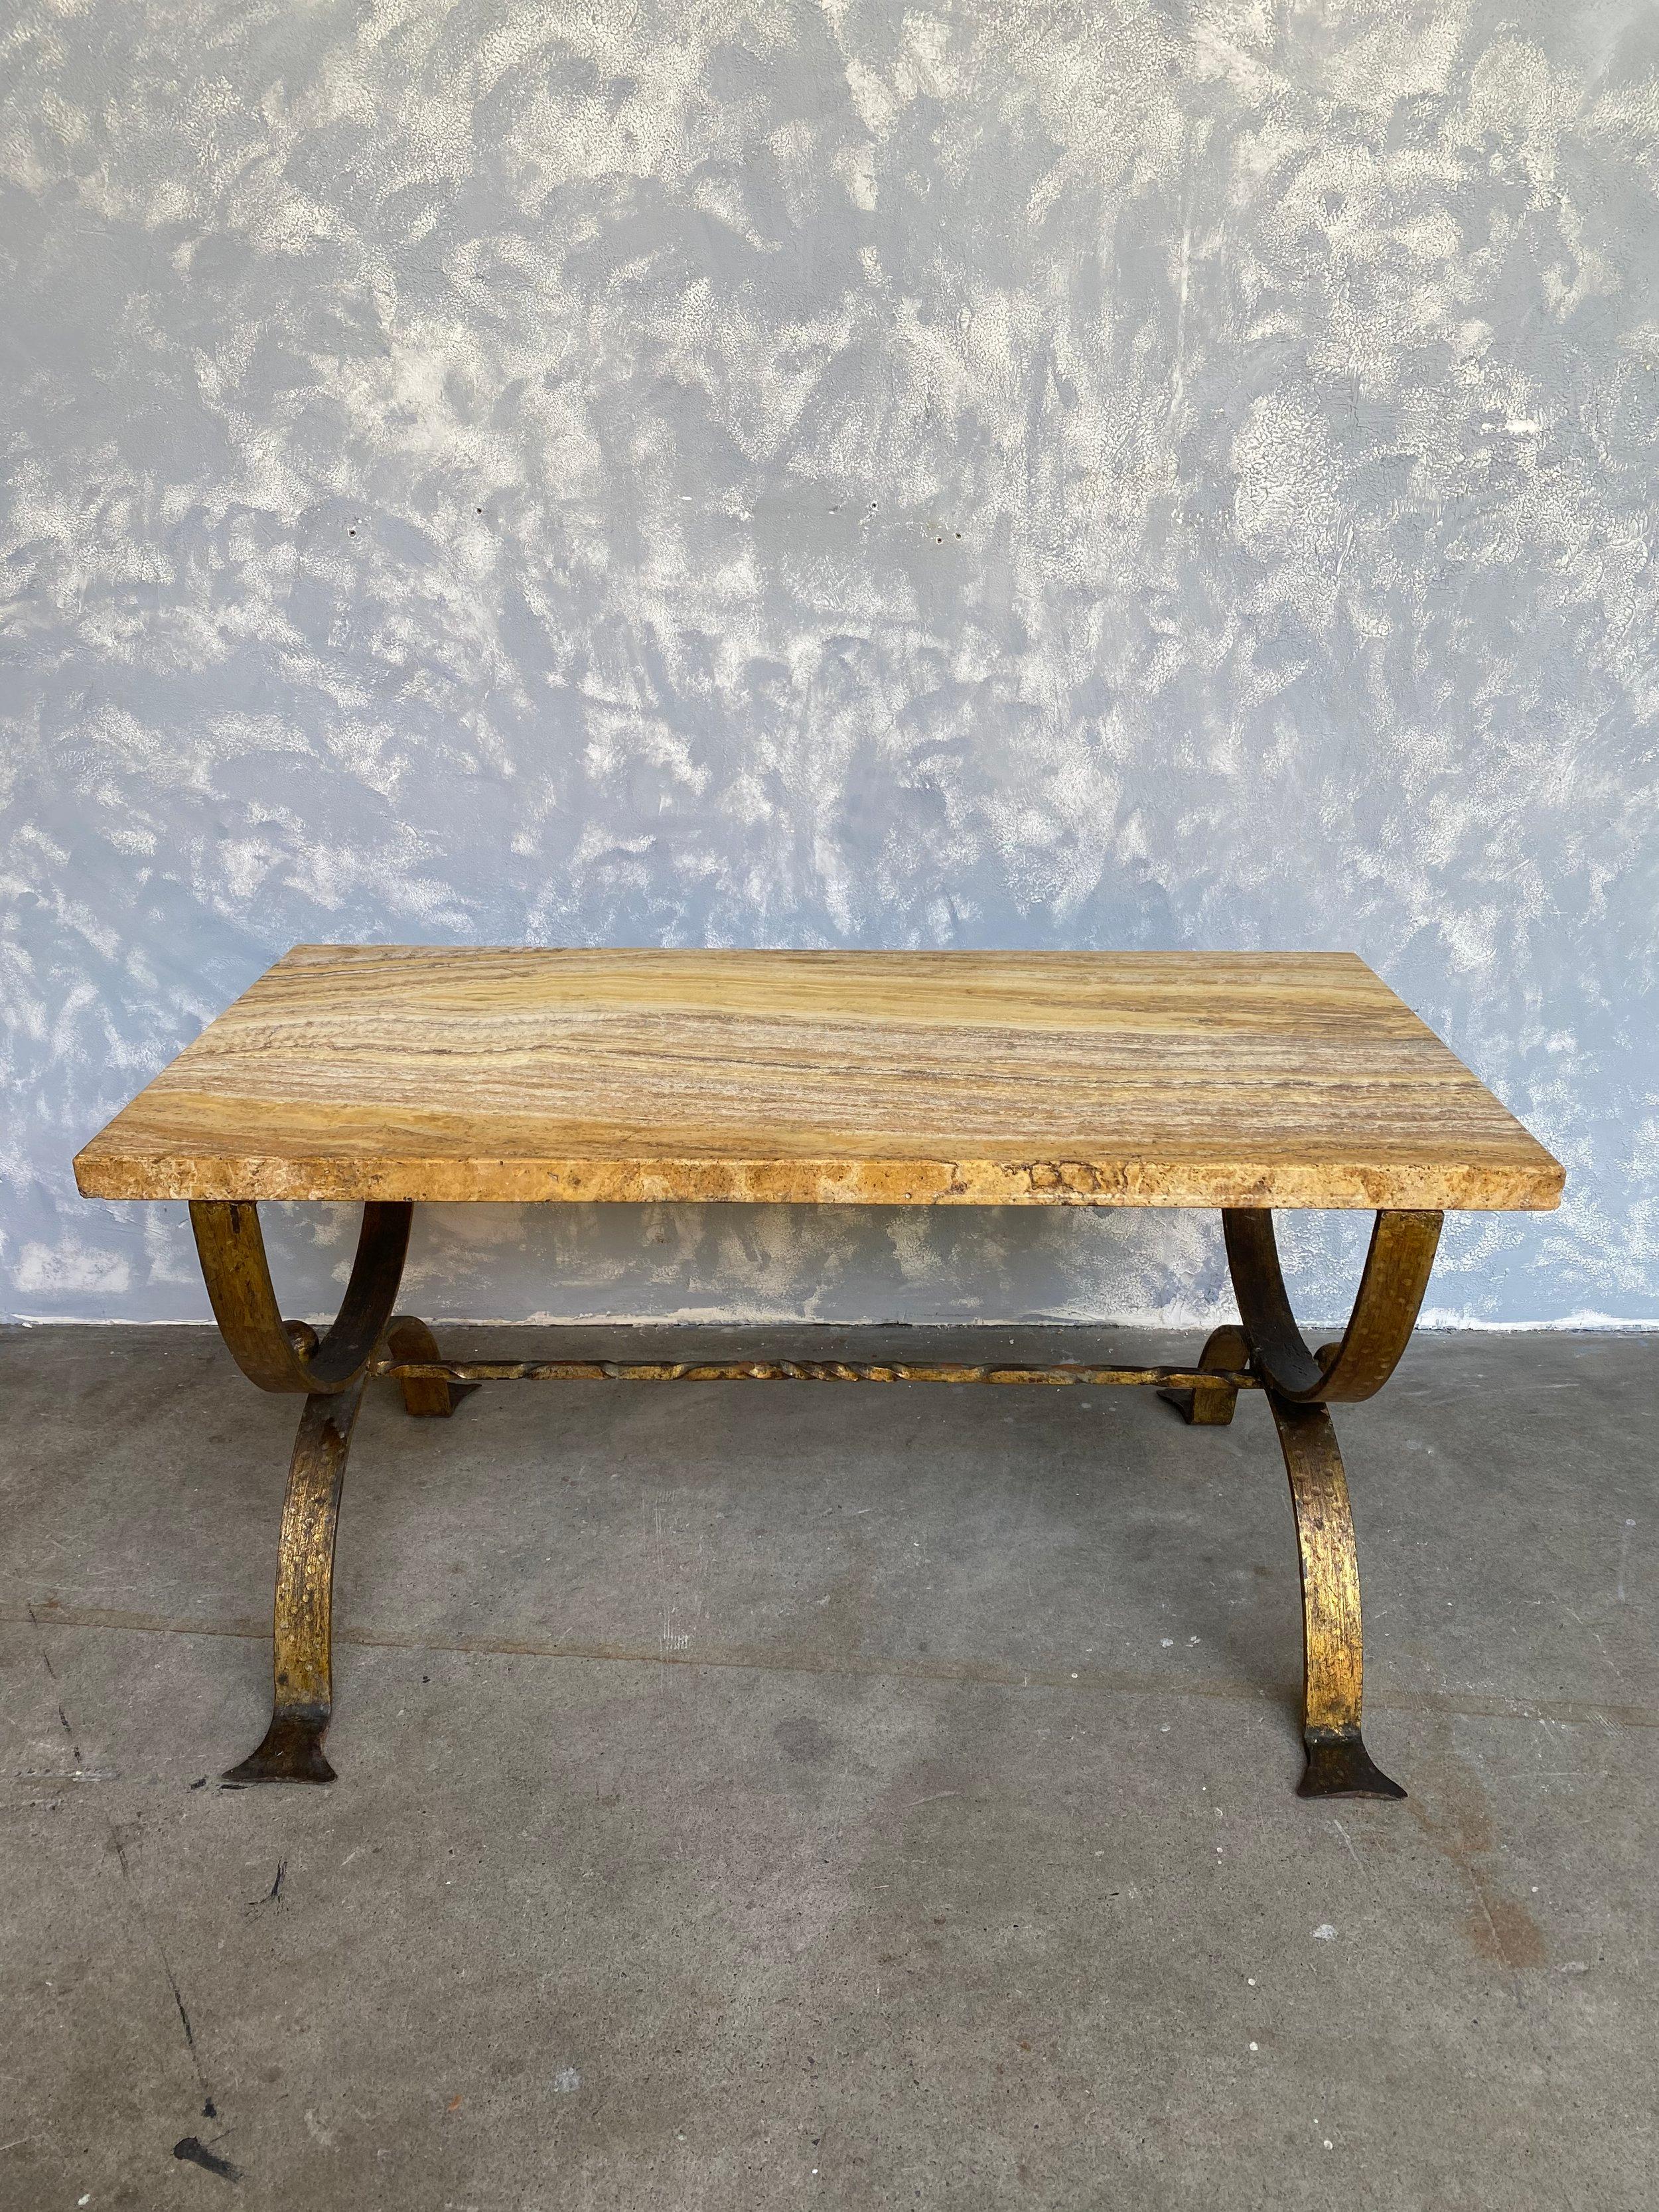 This Spanish marble coffee table from the 1940s features a stunning marble top with beautiful veining, showcasing rich patterns and vibrant hues. The natural variations in the marble add an element of uniqueness and elegance to the table's design.